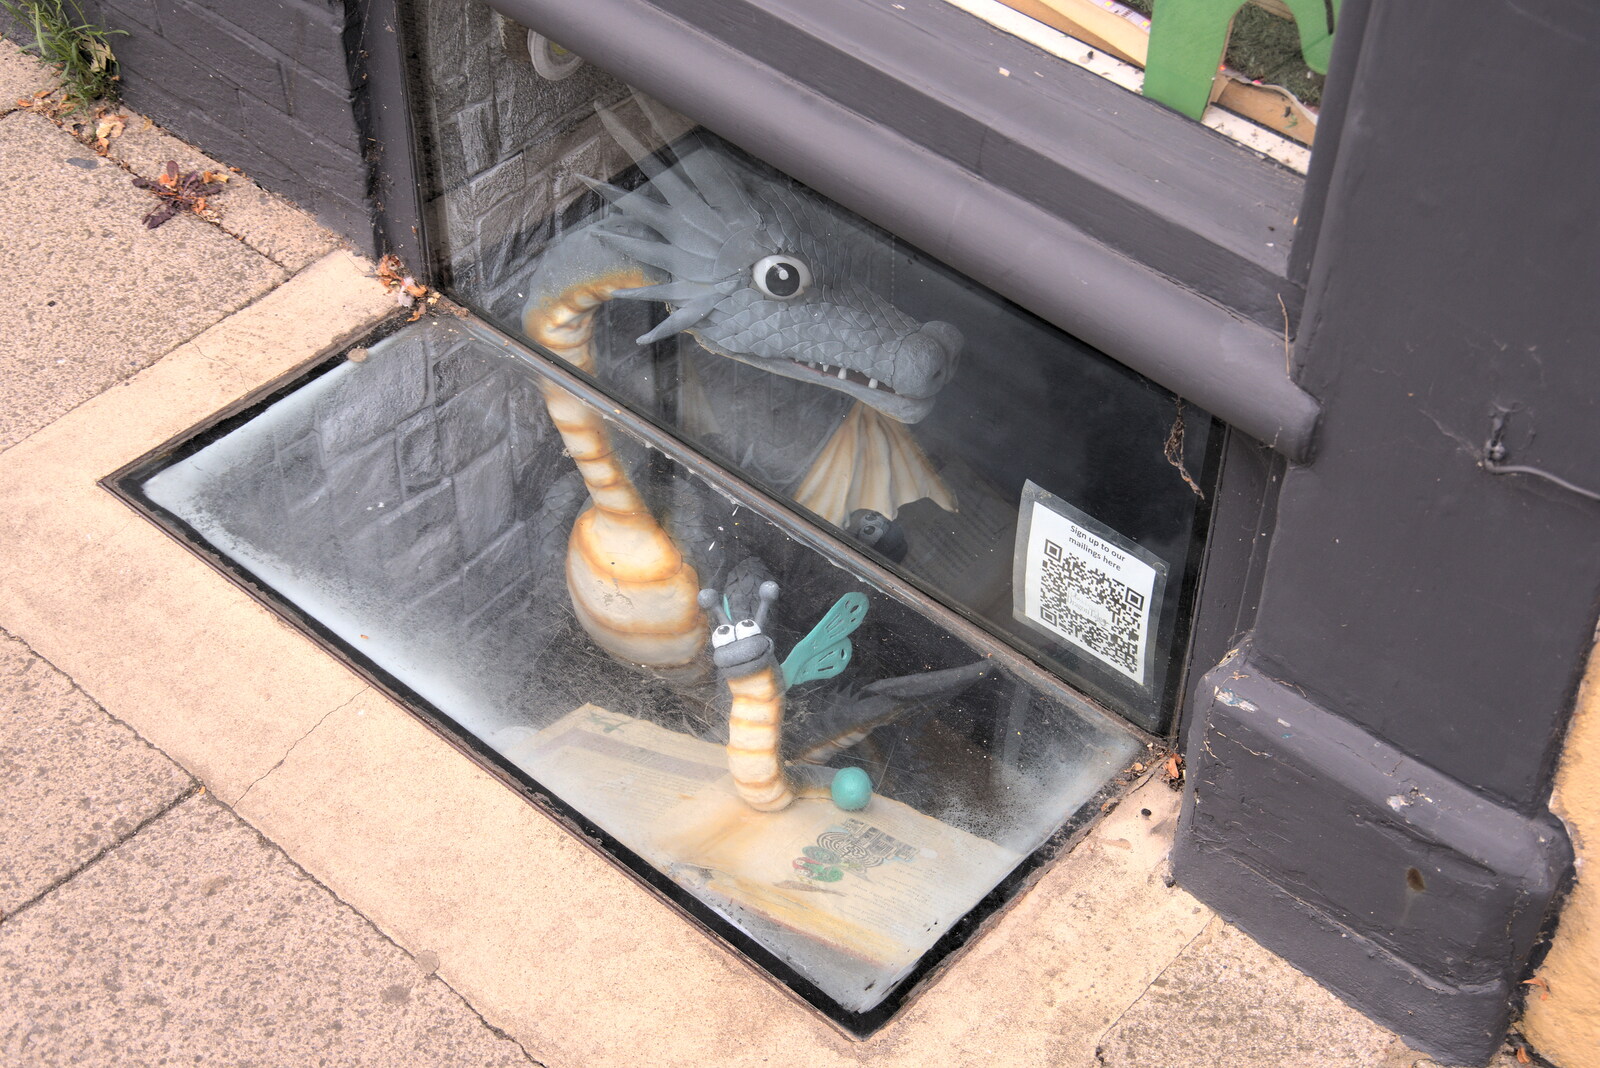 A cool dragon and caterpillar in a basement window from The Lord Mayor's Procession, Norwich, Norfolk - 2nd July 2022